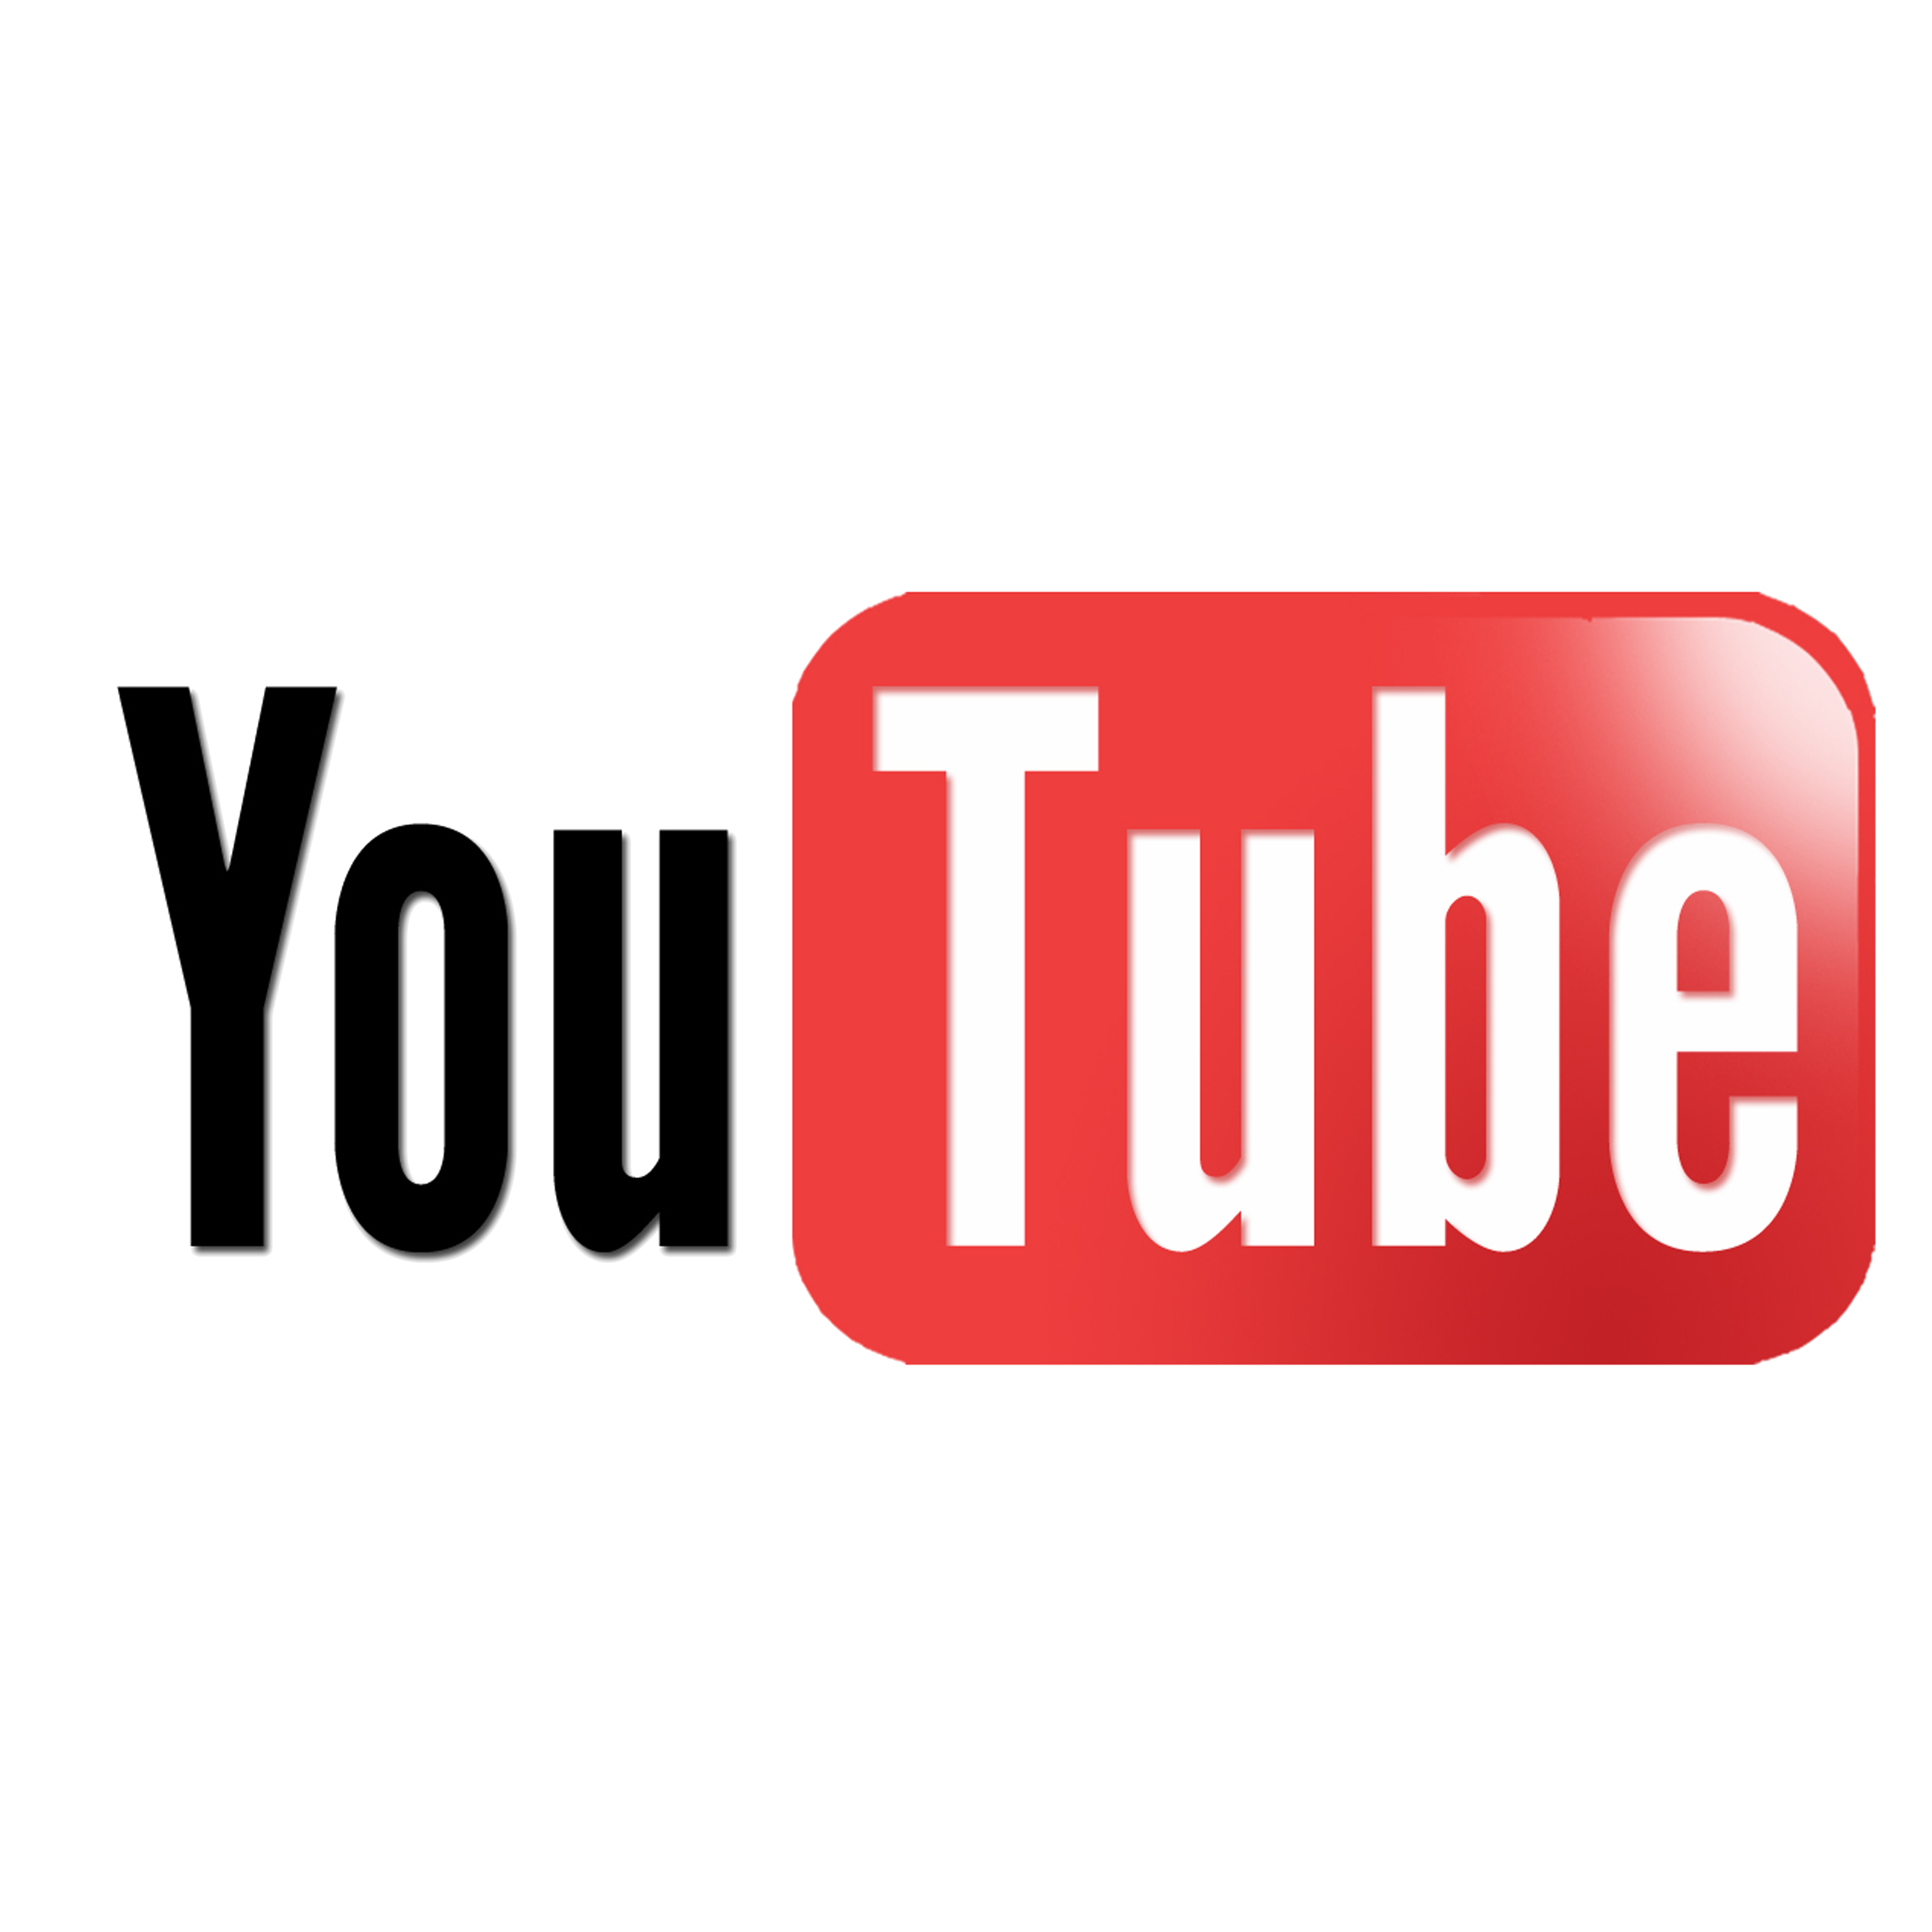 PNG Youtube - 40172